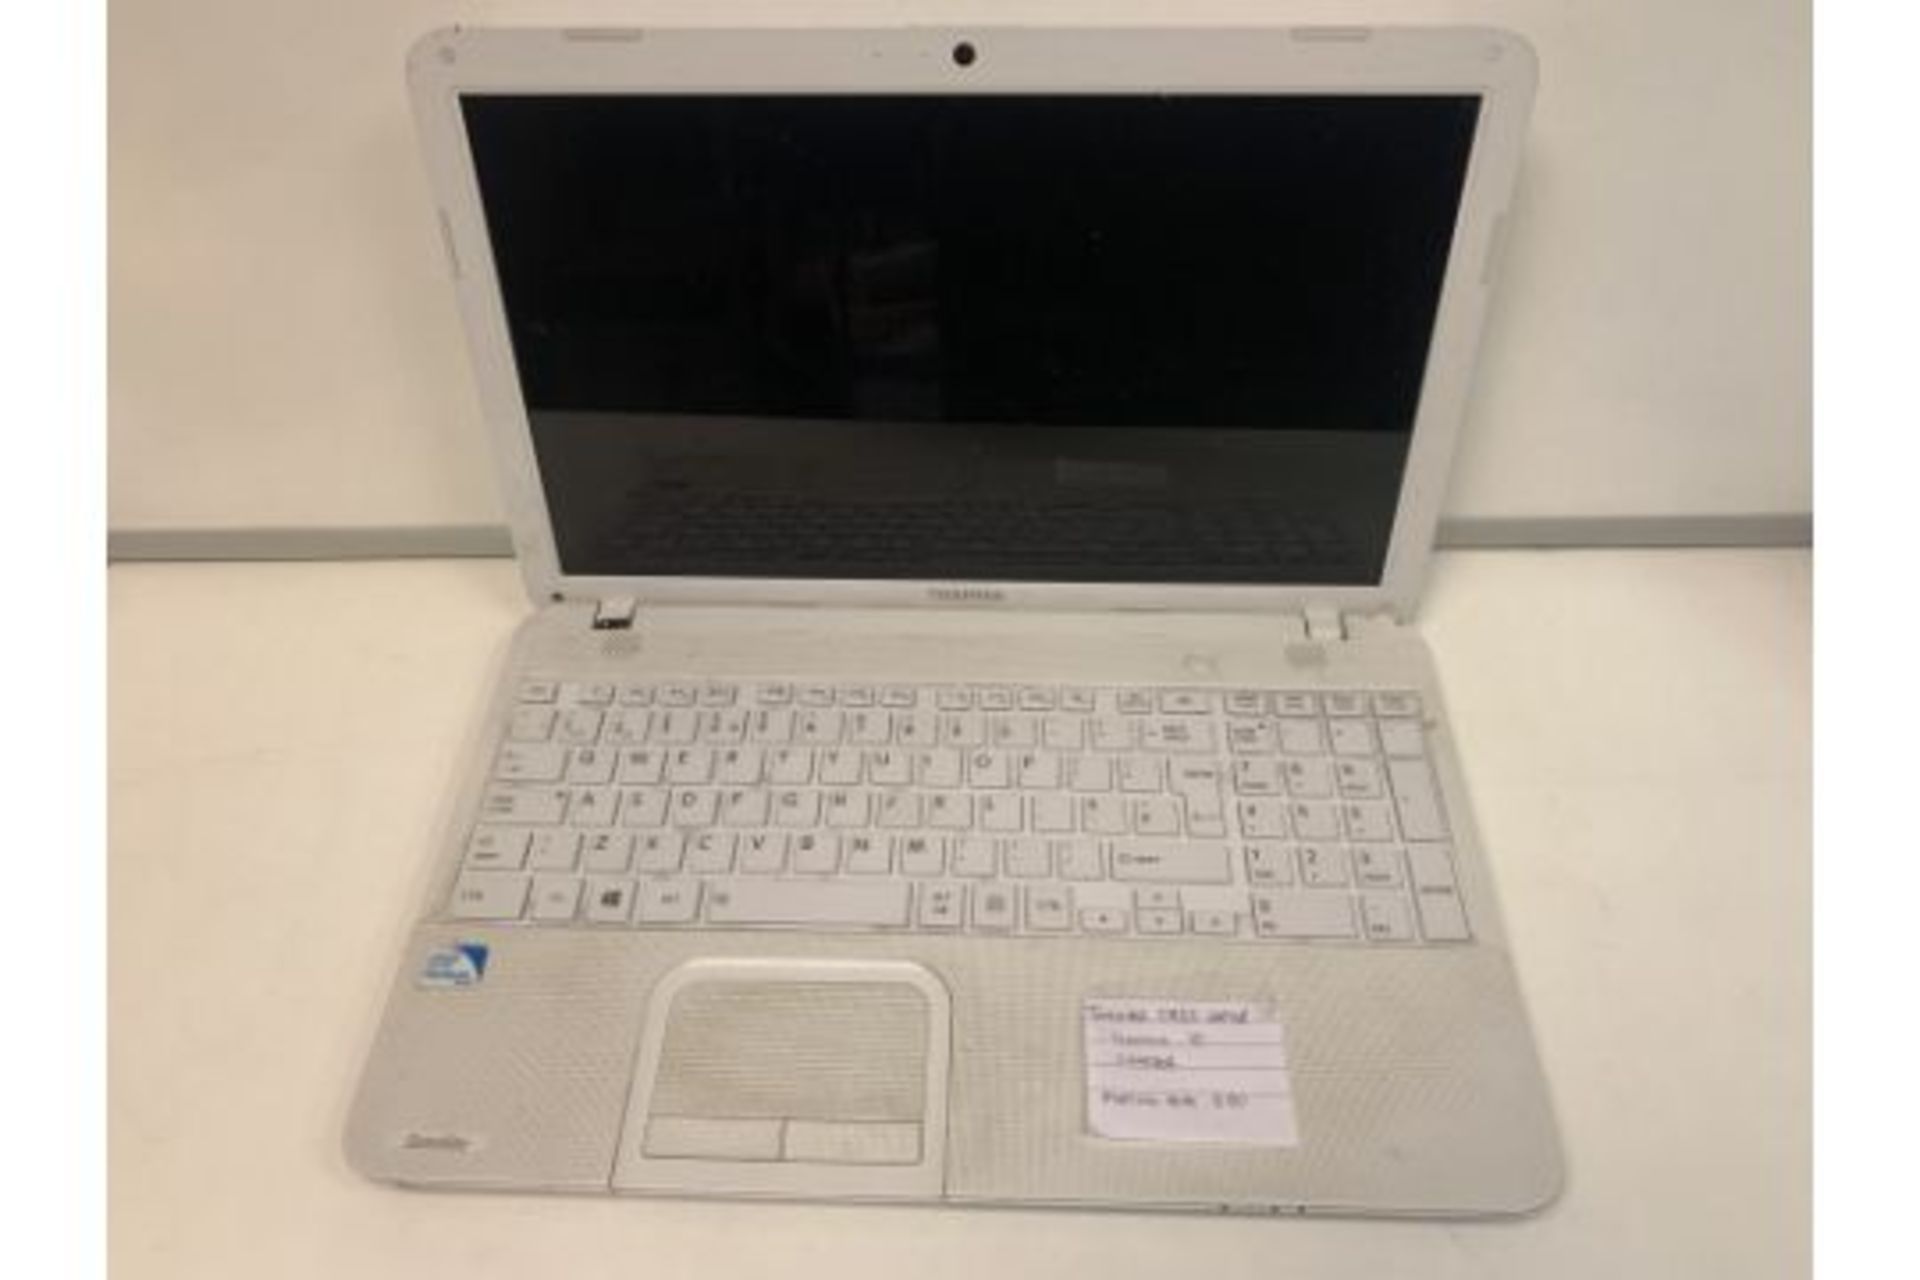 TOSHIBA C855 LAPTOP, WINDOWS 10 WITH CHARGER (97/25)